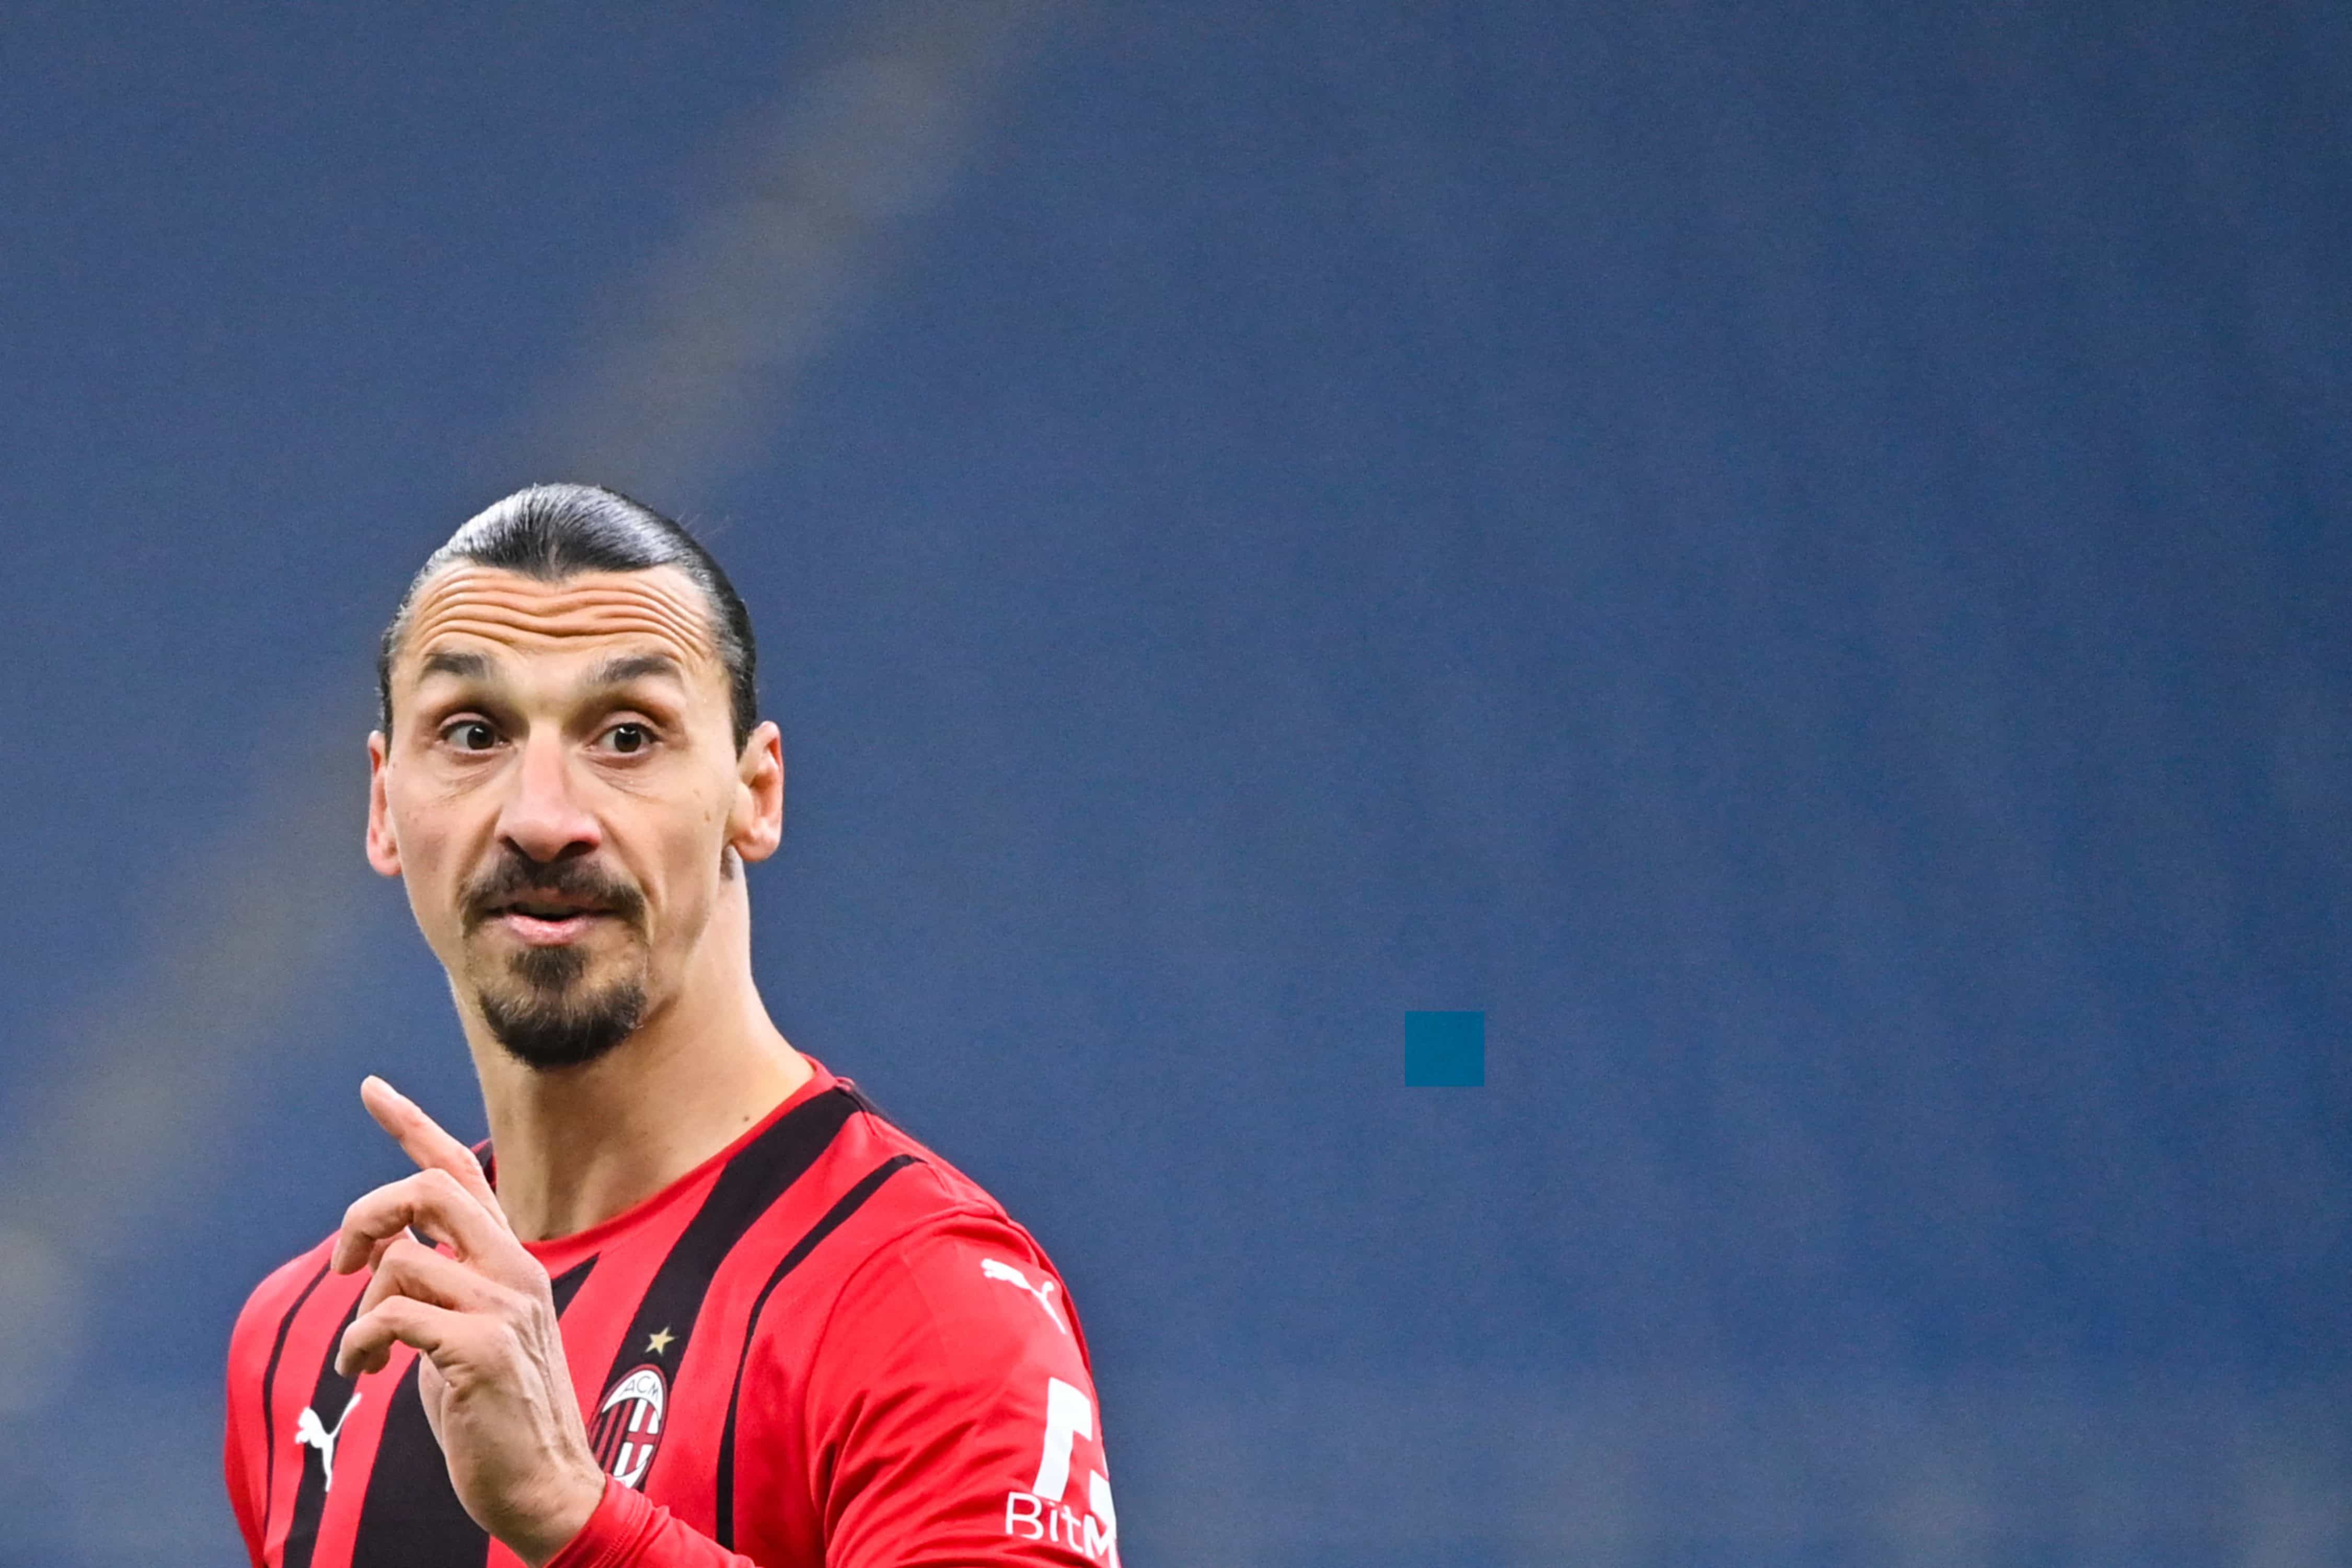 Zlatan continues to find the net even into his 40s